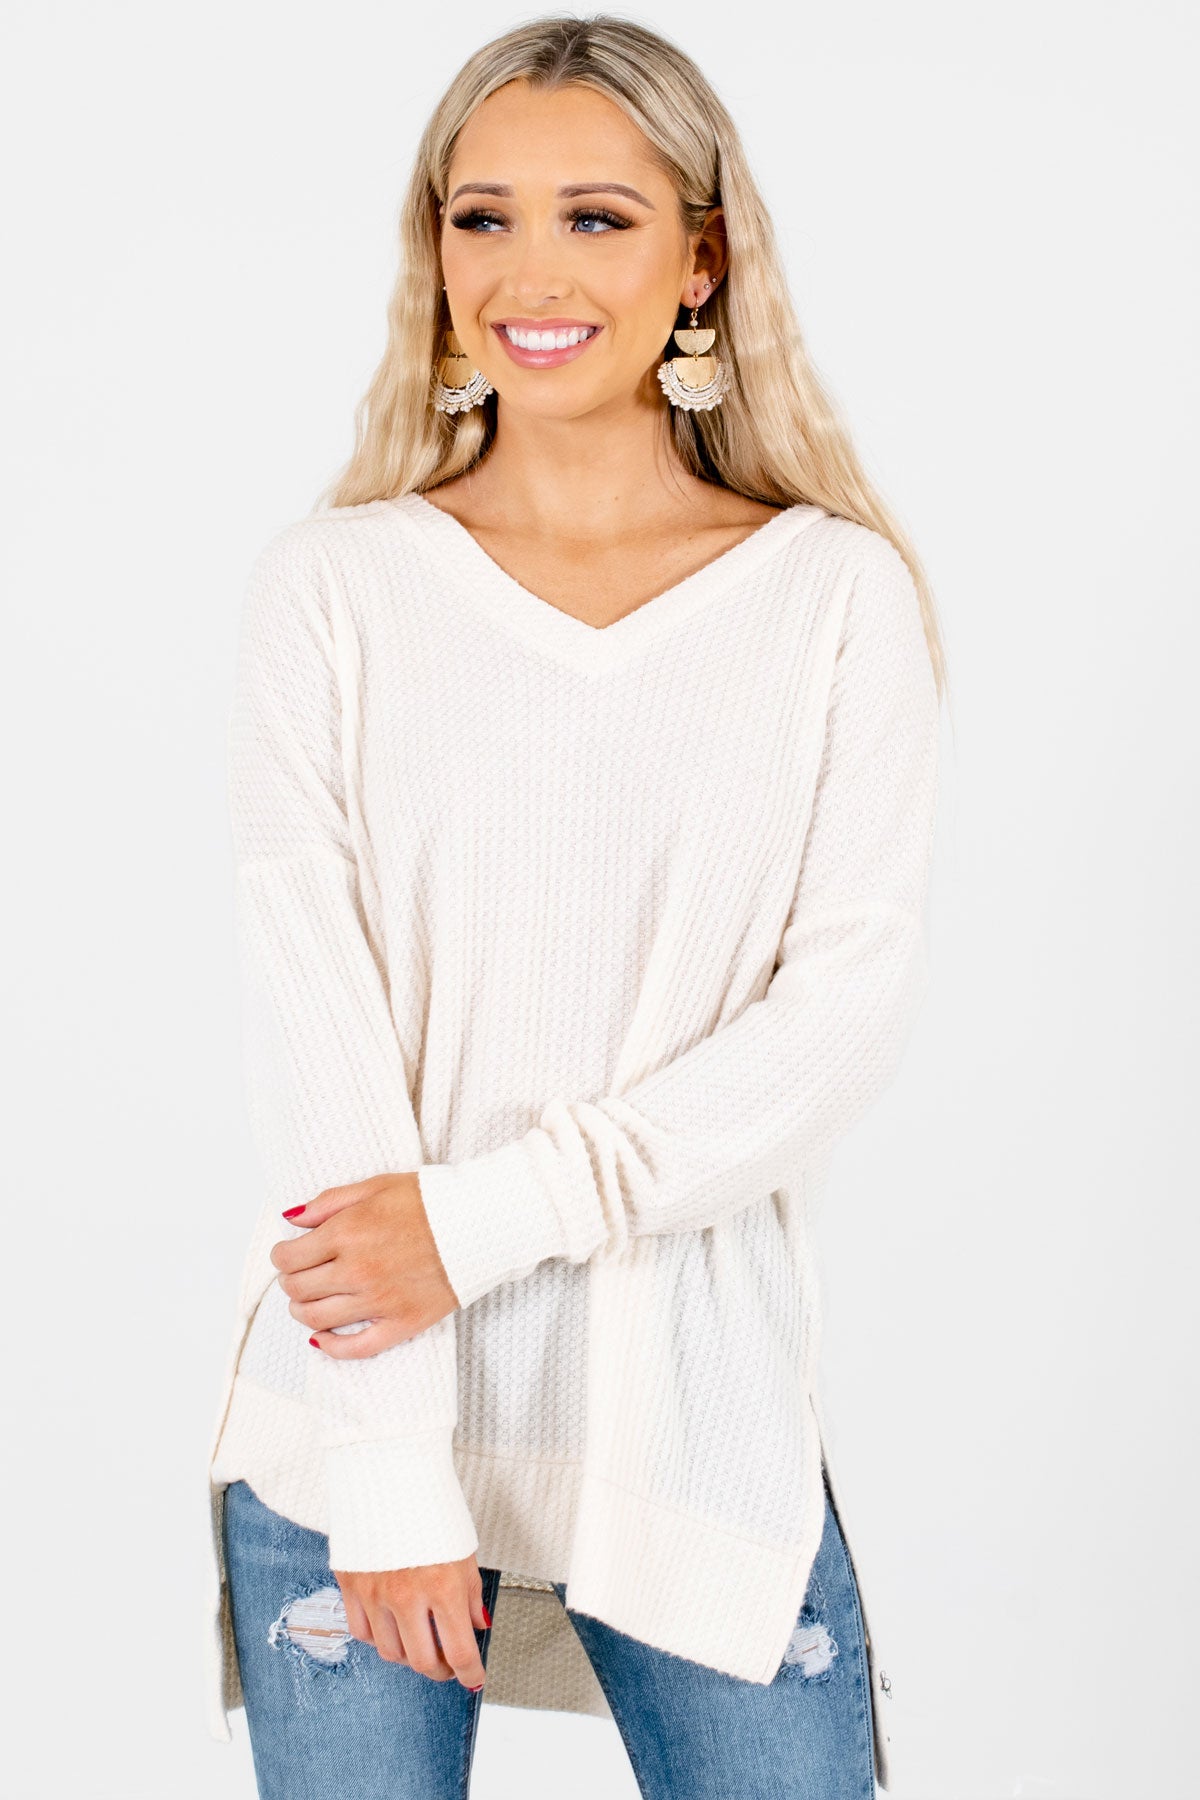 Cream Cute and Comfortable Boutique Tops for Women